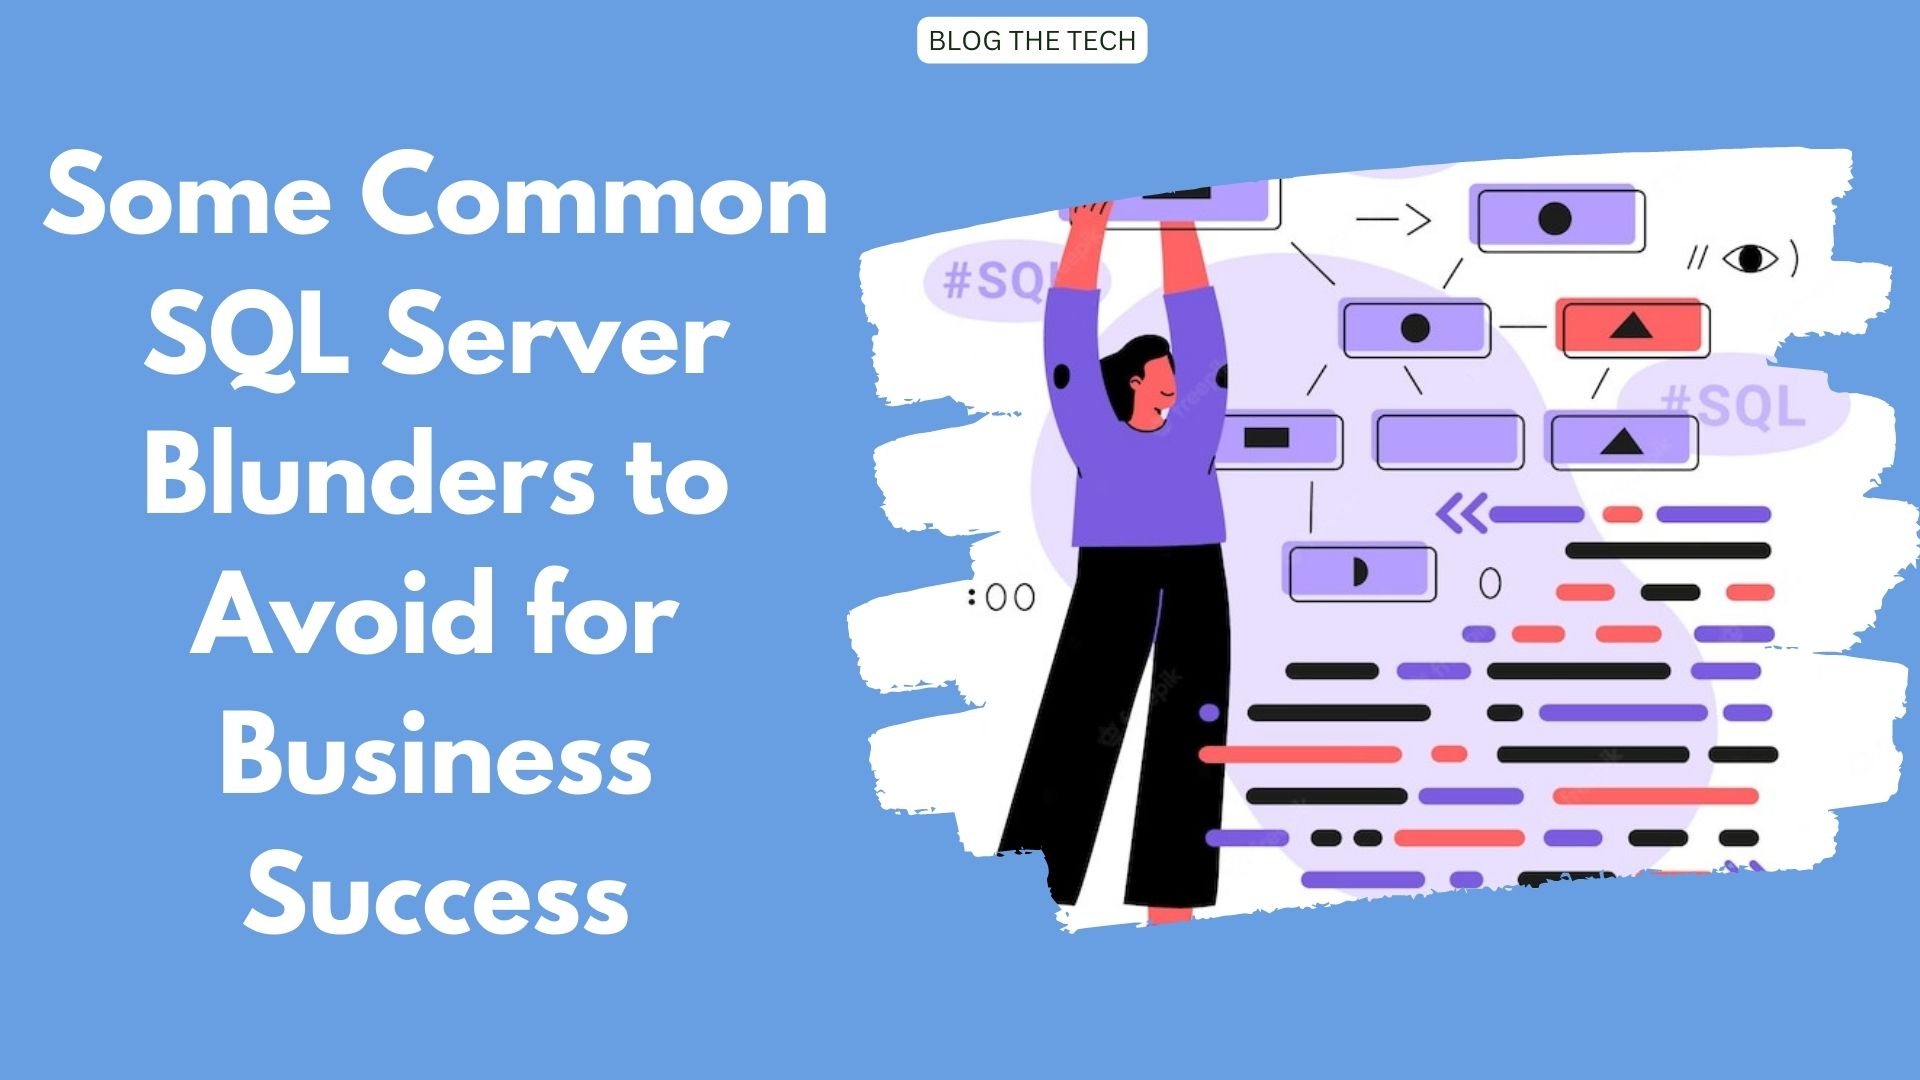 Some Common SQL Server Blunders to Avoid for Business Success